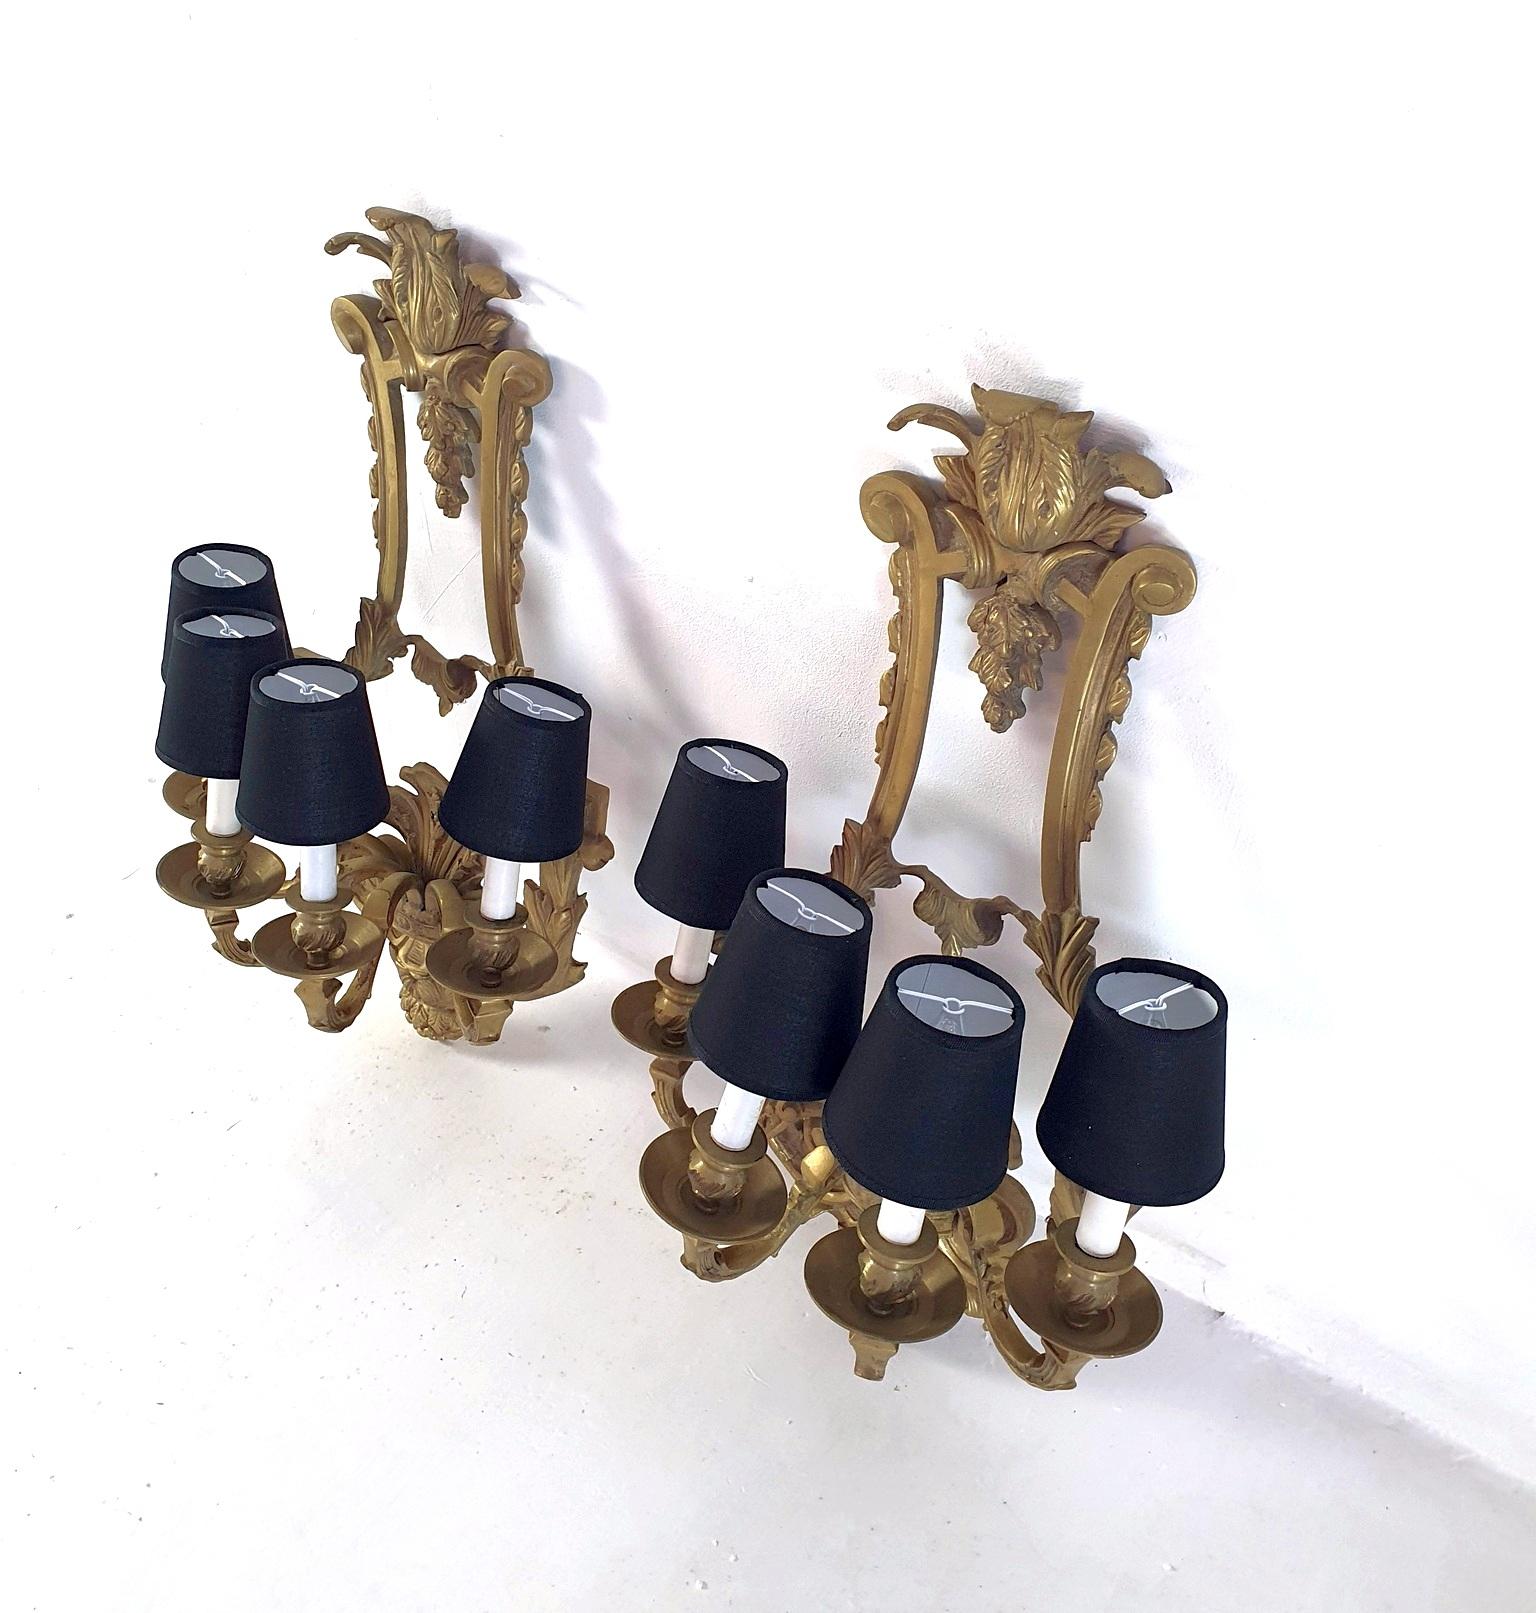 Monumental and unusual pair of finely decorated Renaissance wall sconces produced circa 1930-1940 made in cast bronze. Each sconce has four candleholders made for E14 lamps. Can be used with naked lightbulbs or with small chandelier shades. Each